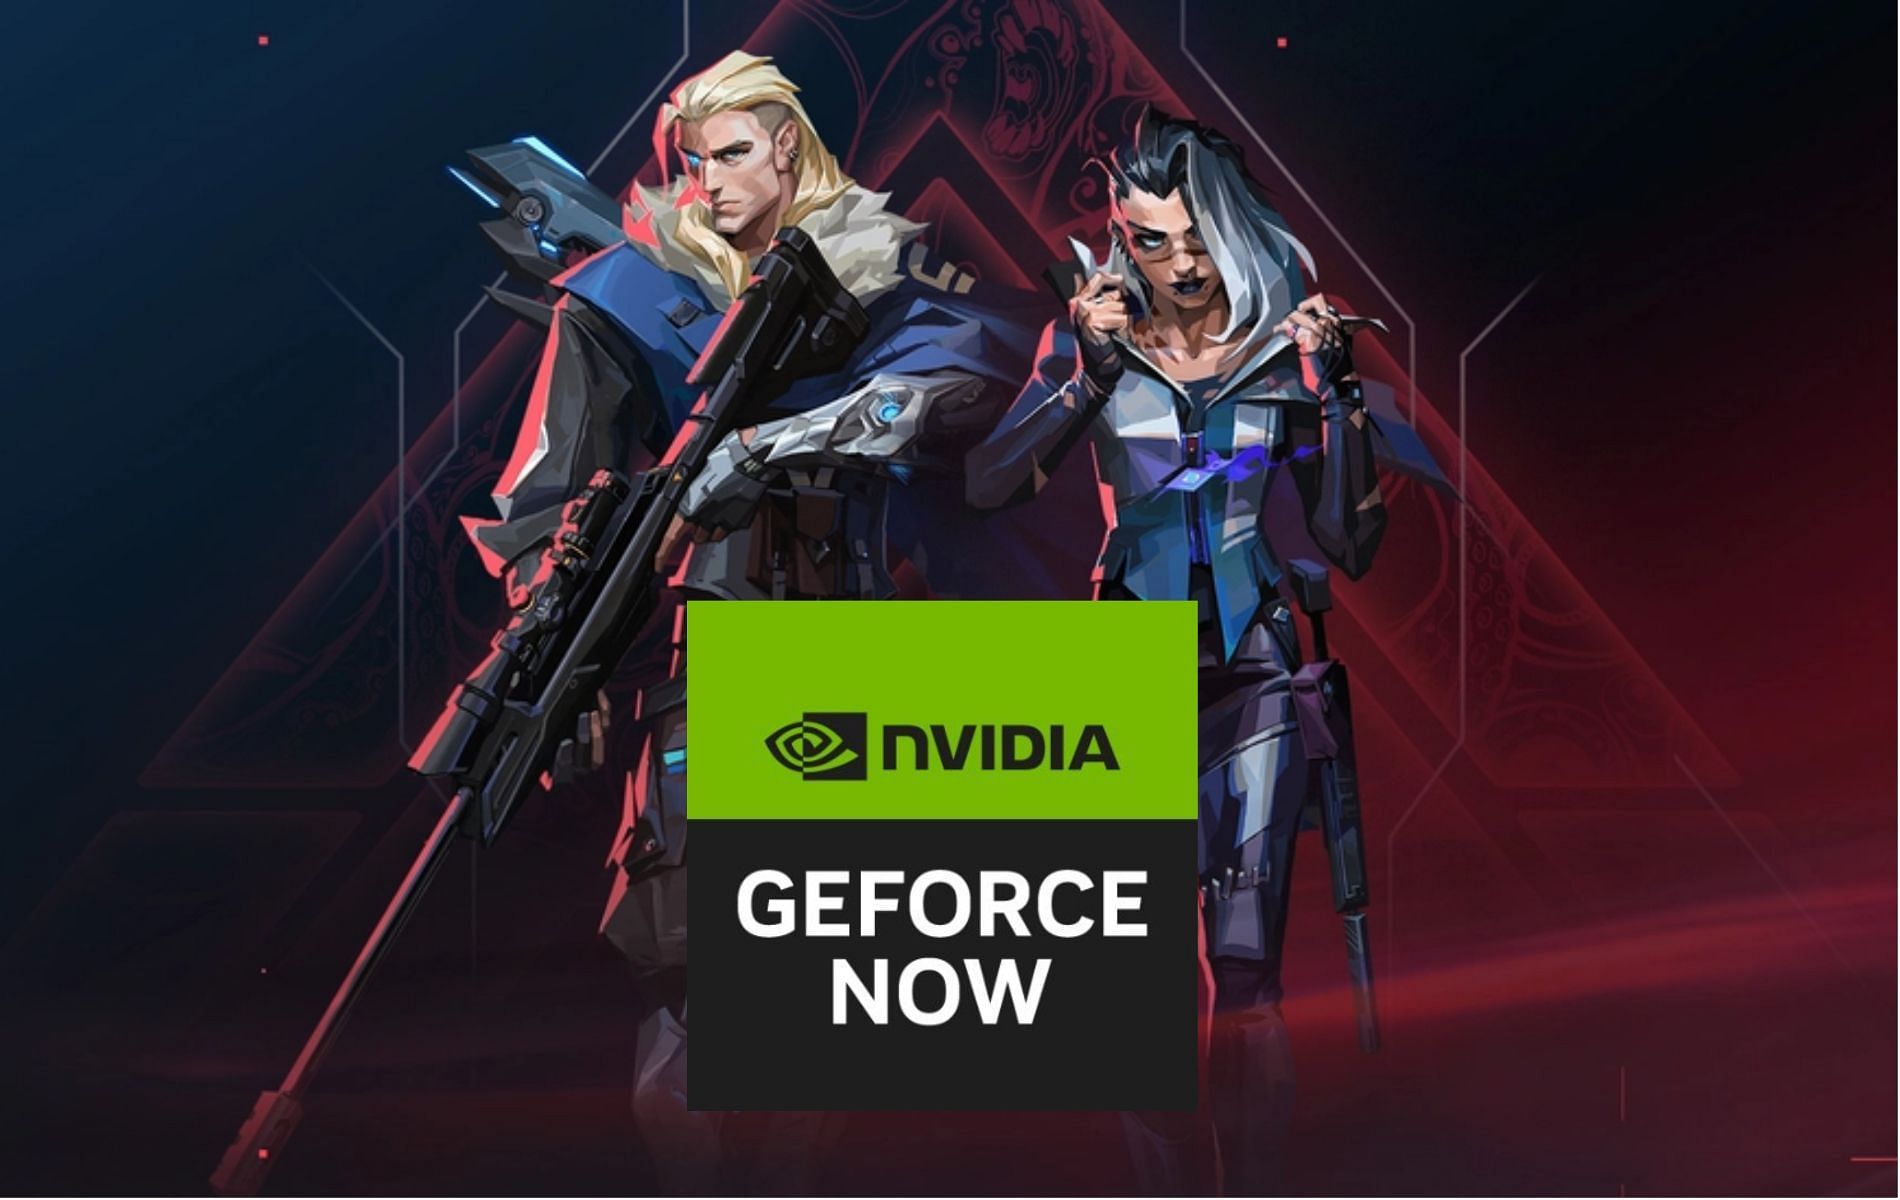 How to play games on GeForce NOW ?